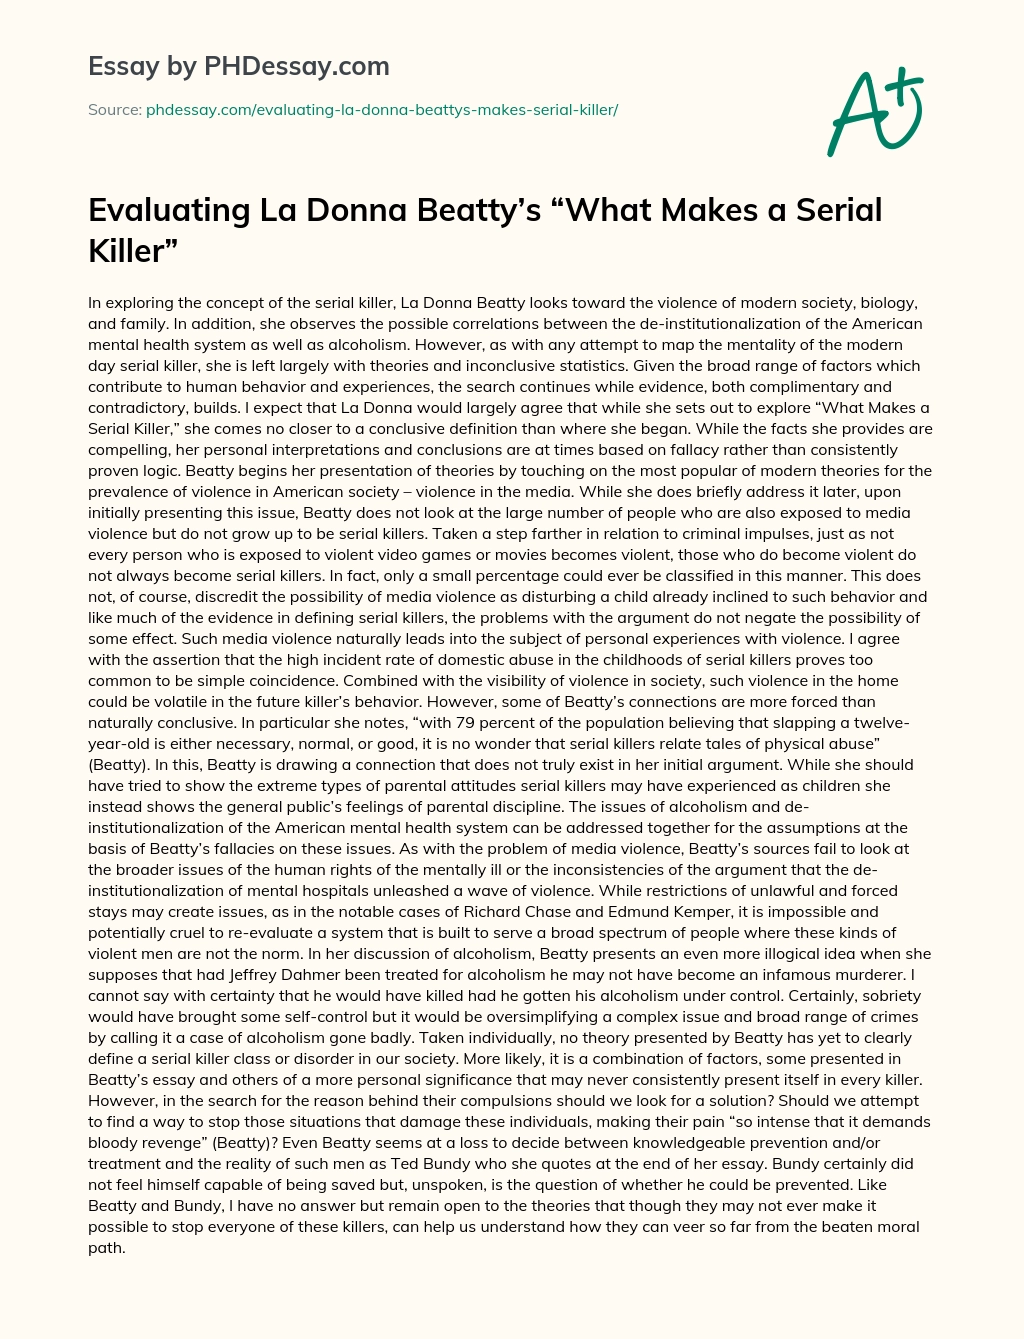 Evaluating La Donna Beatty’s “What Makes a Serial Killer” essay